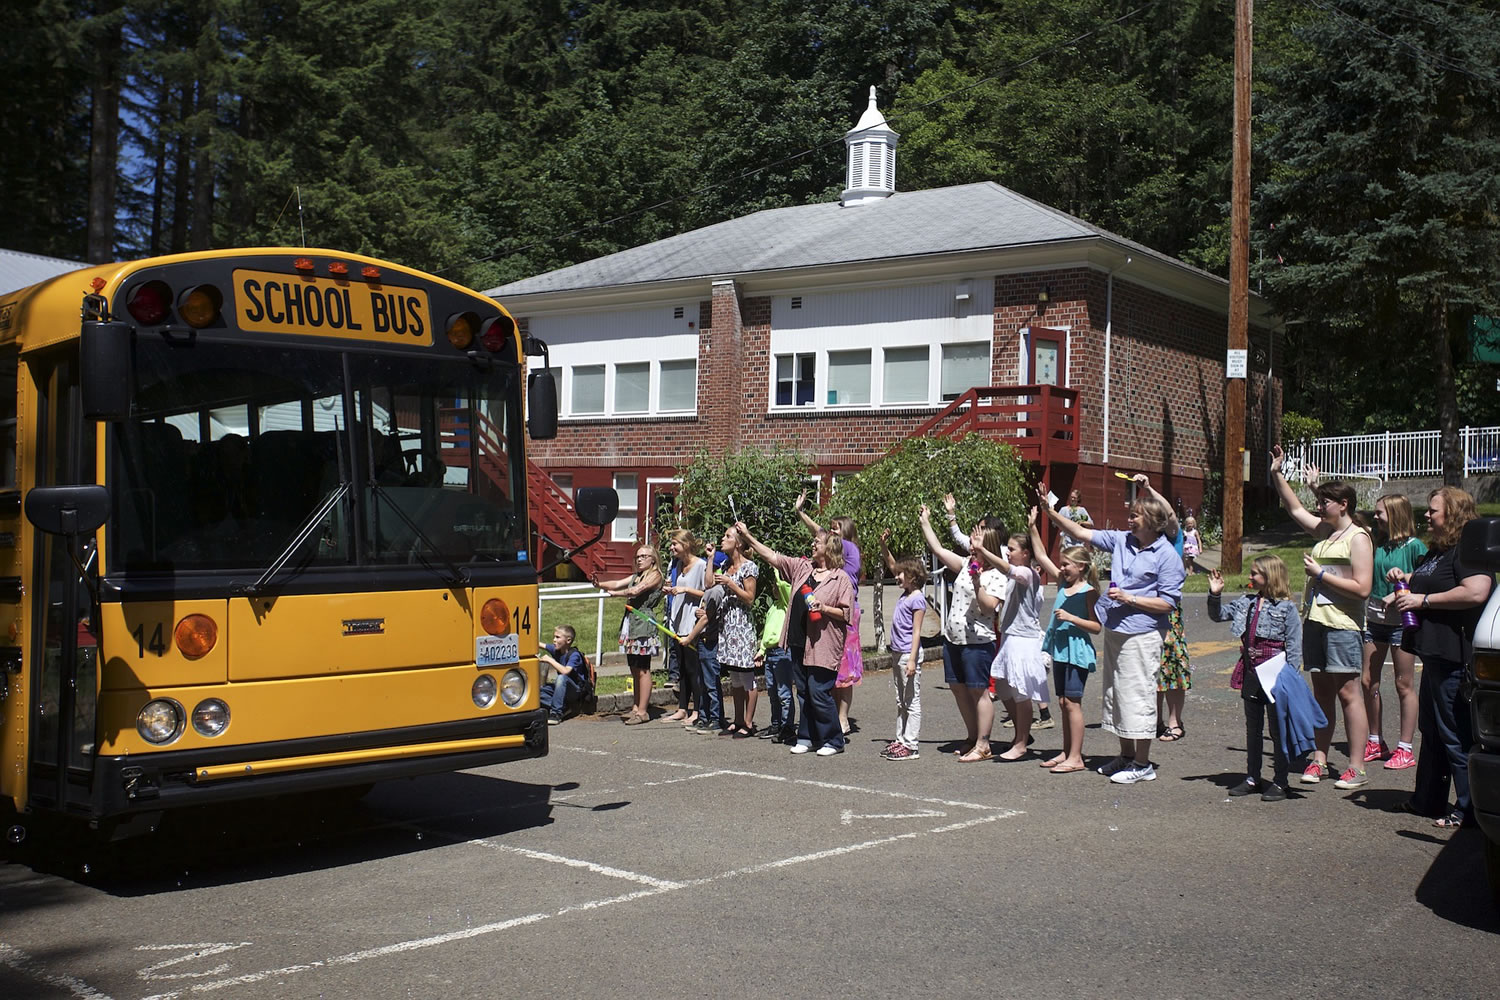 On the last day of the school year at Green Mountain School, staff members blow bubbles and wave goodbye to students on departing buses.